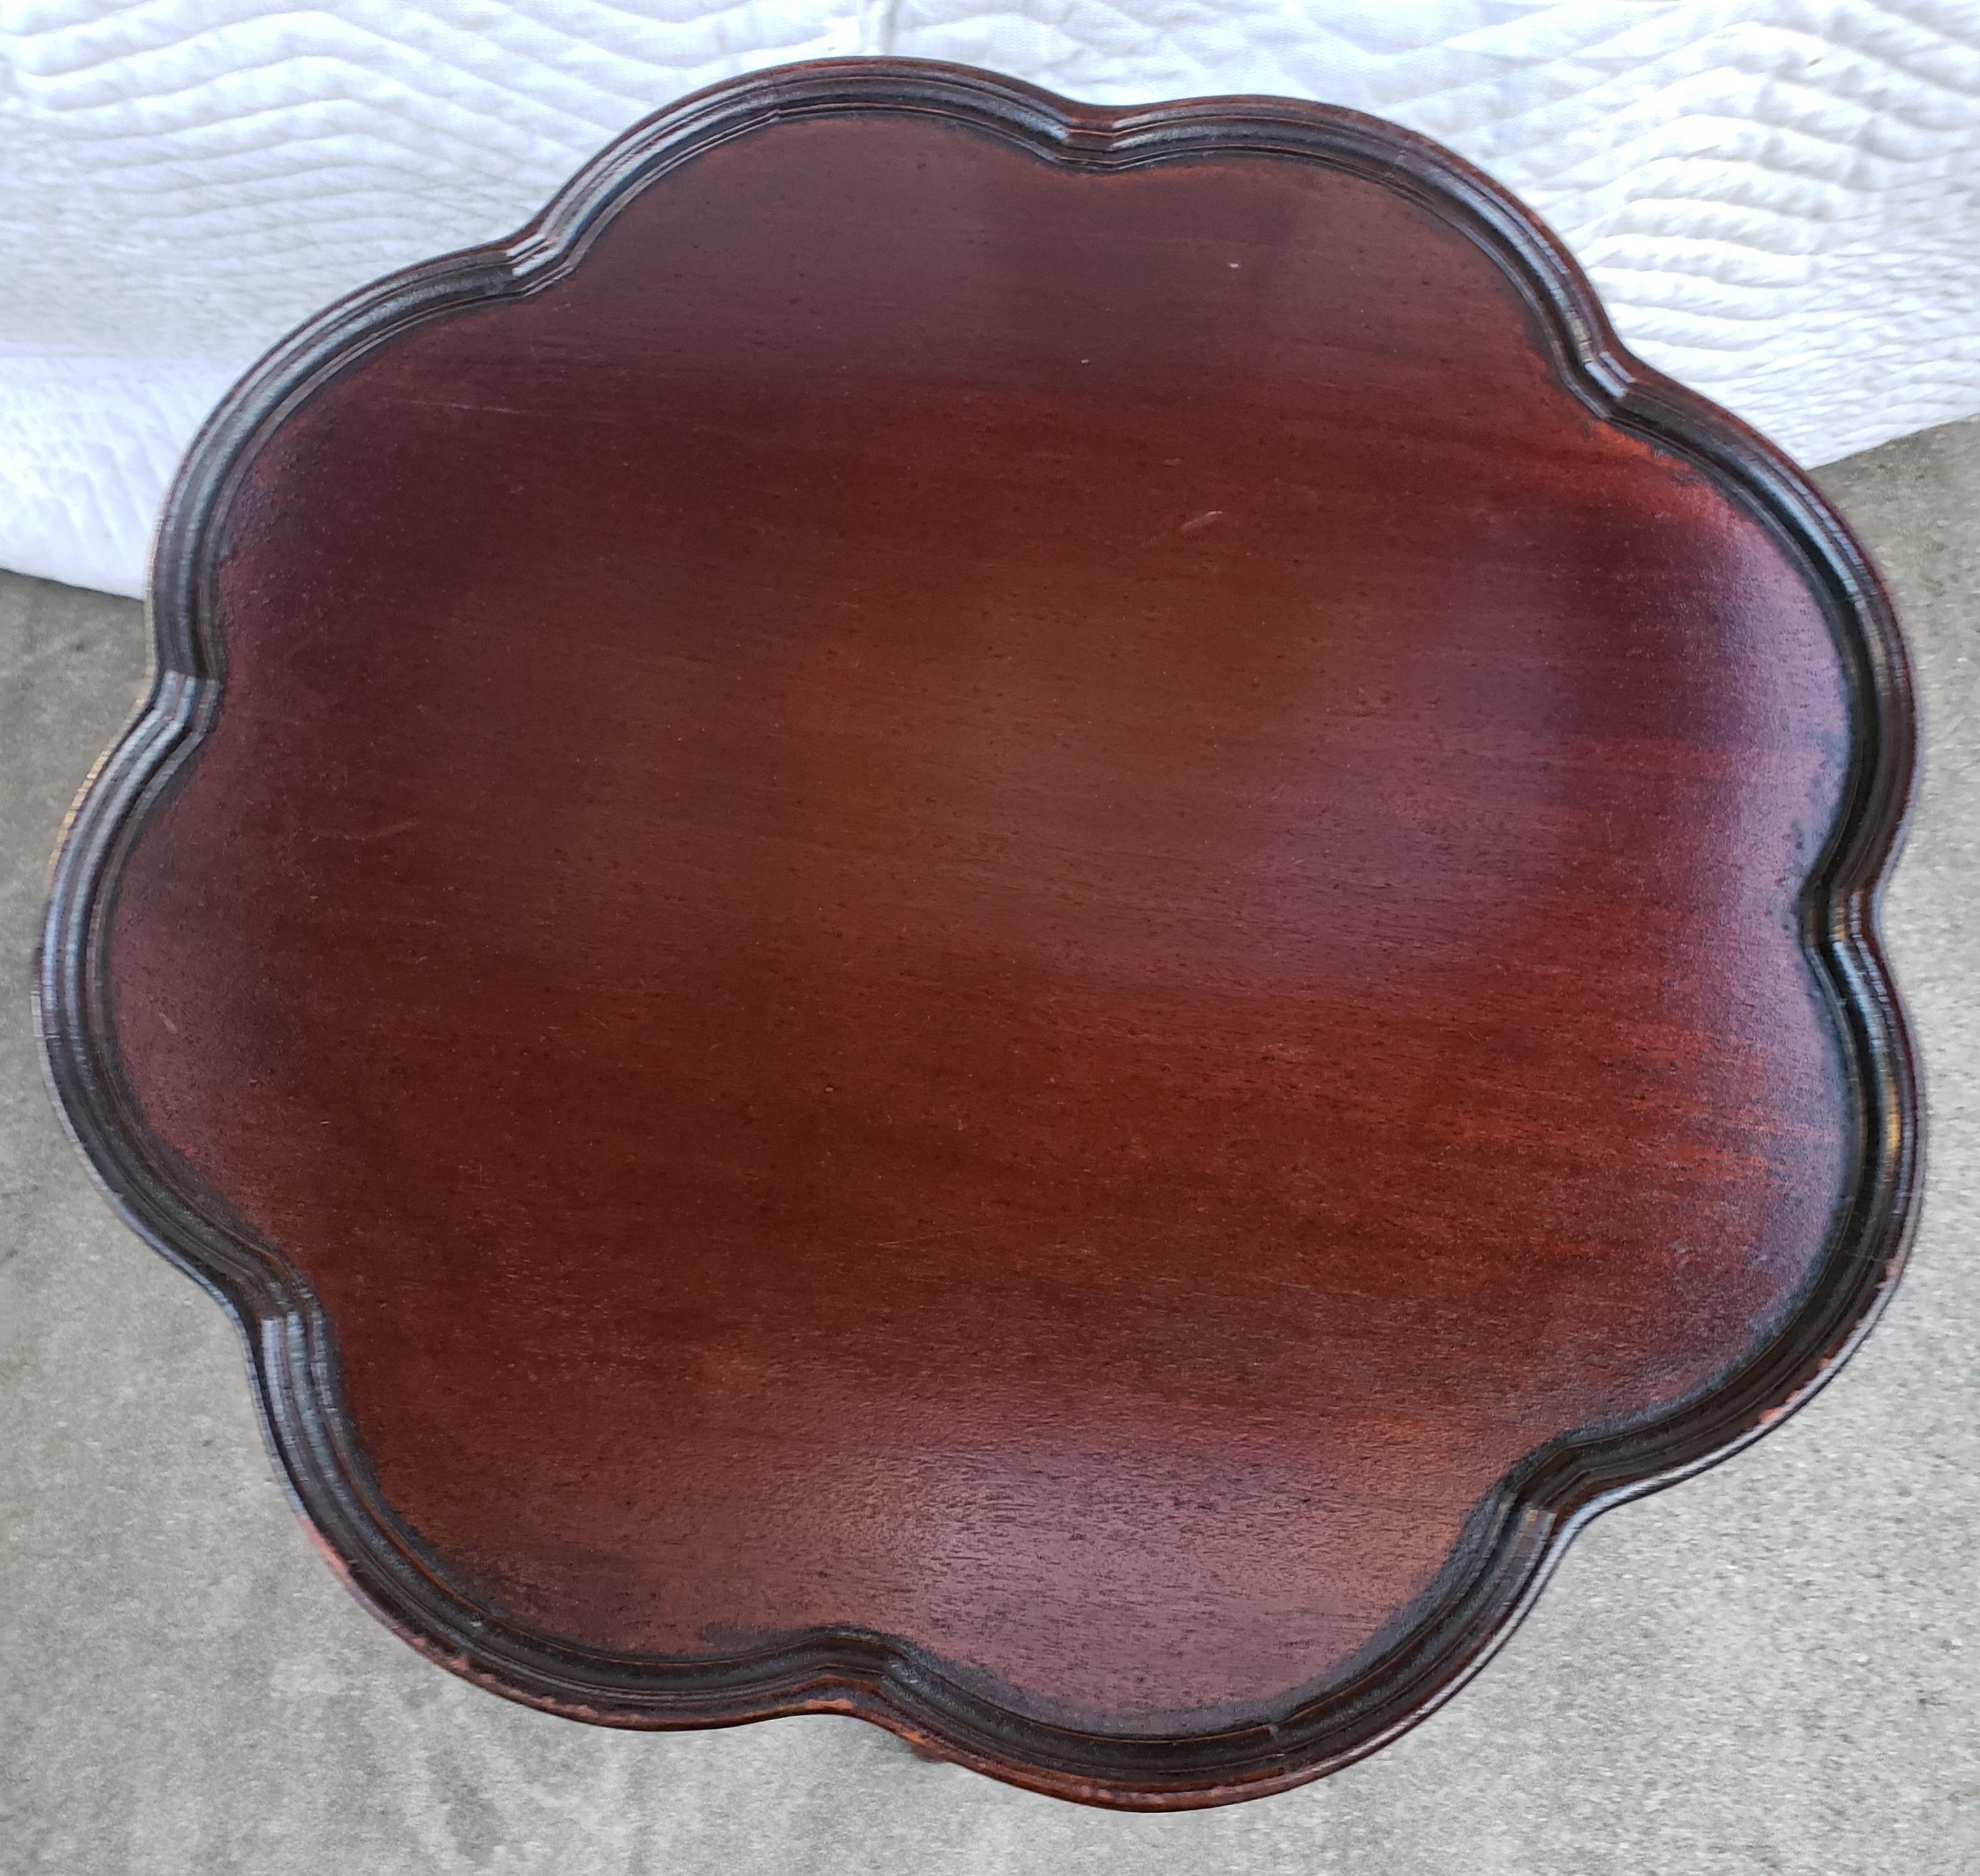 For your consideration is this Vintage Solid Mahogany Crust Pie Scallop Edge Pedestal Accent table in very good condition.
Seems to have been refinished.
Measurements: 23